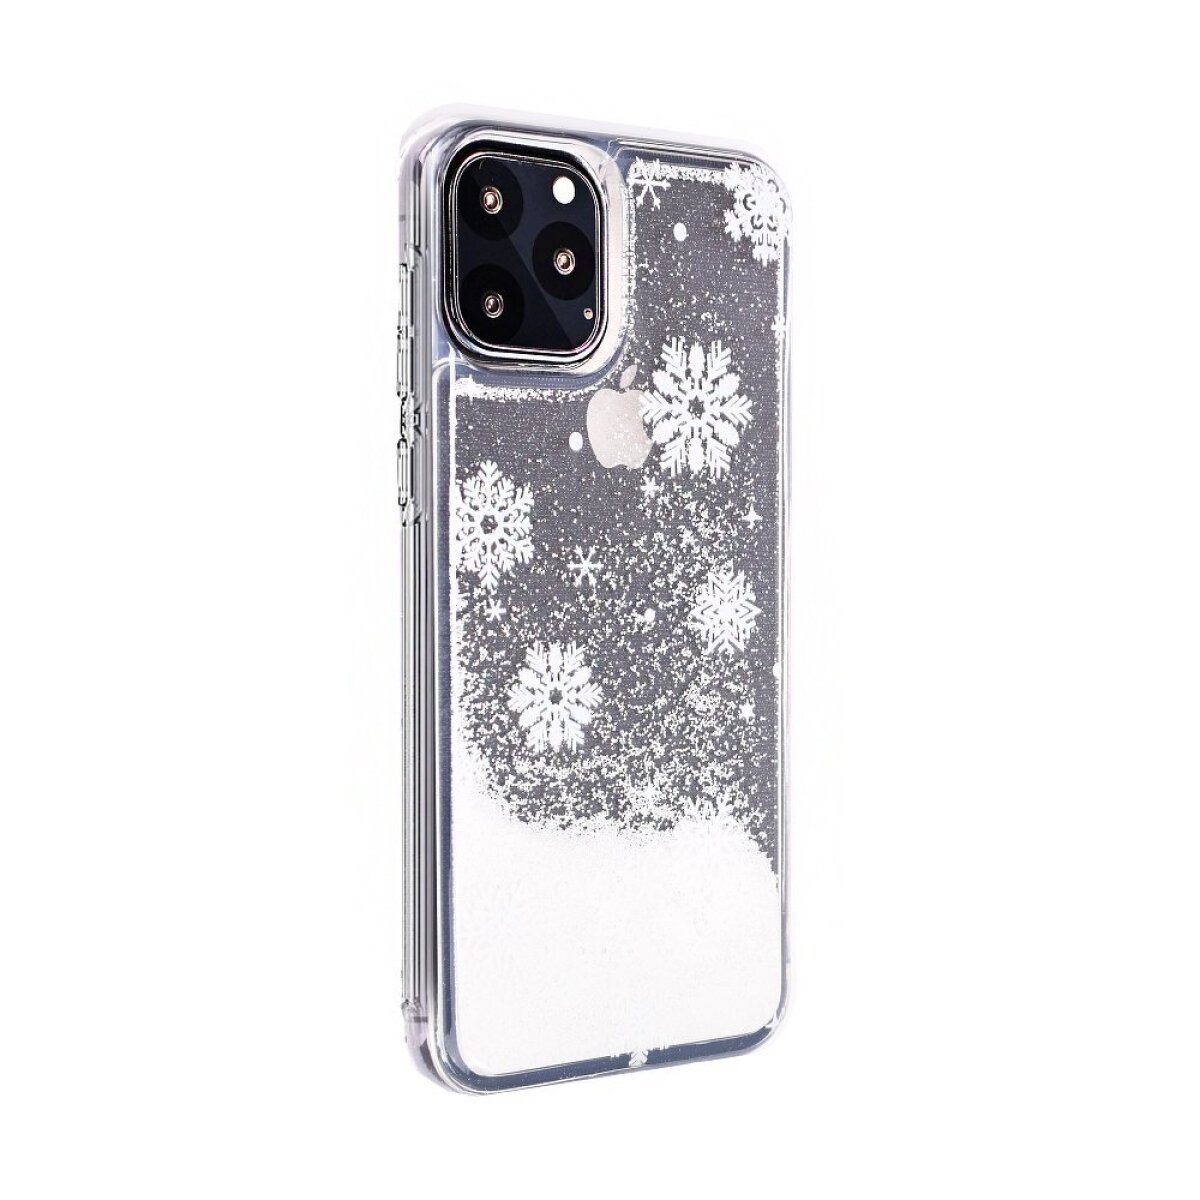 FORCELL Winter P Not snowflakes, P Full smart Huawei, available Smart 2019 Cover, 2019